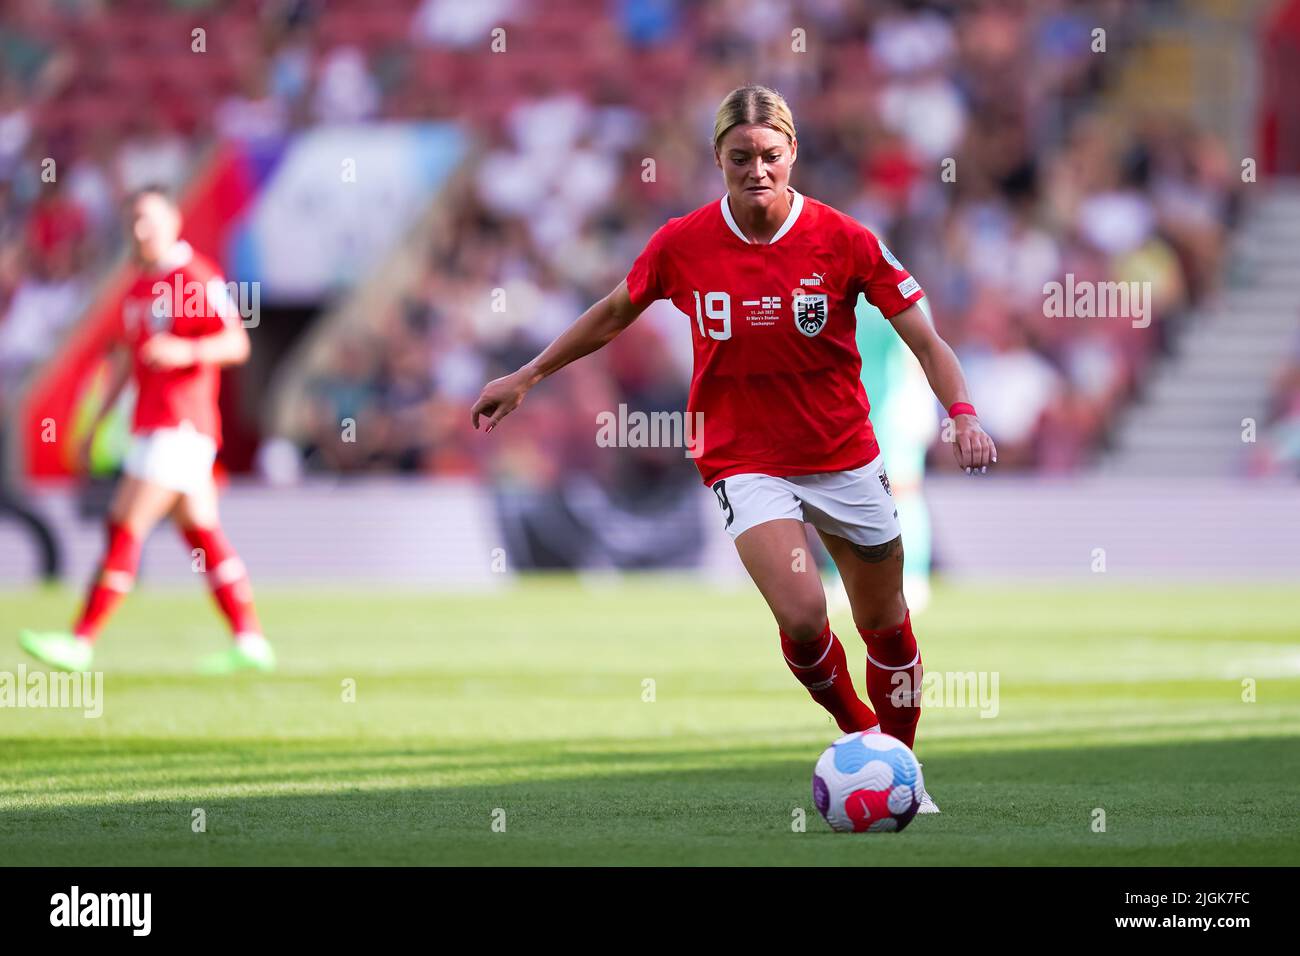 Southampton, UK. 11th July, 2022. Southampton, England, July 11th 2022: Verena Hanshaw (19 Austria) controls the ball during the UEFA Womens Euro 2022 group A football match between Austria and Northern Ireland at St. Marys Stadium in Southampton, England. (Daniela Porcelli /SPP) Credit: SPP Sport Press Photo. /Alamy Live News Stock Photo